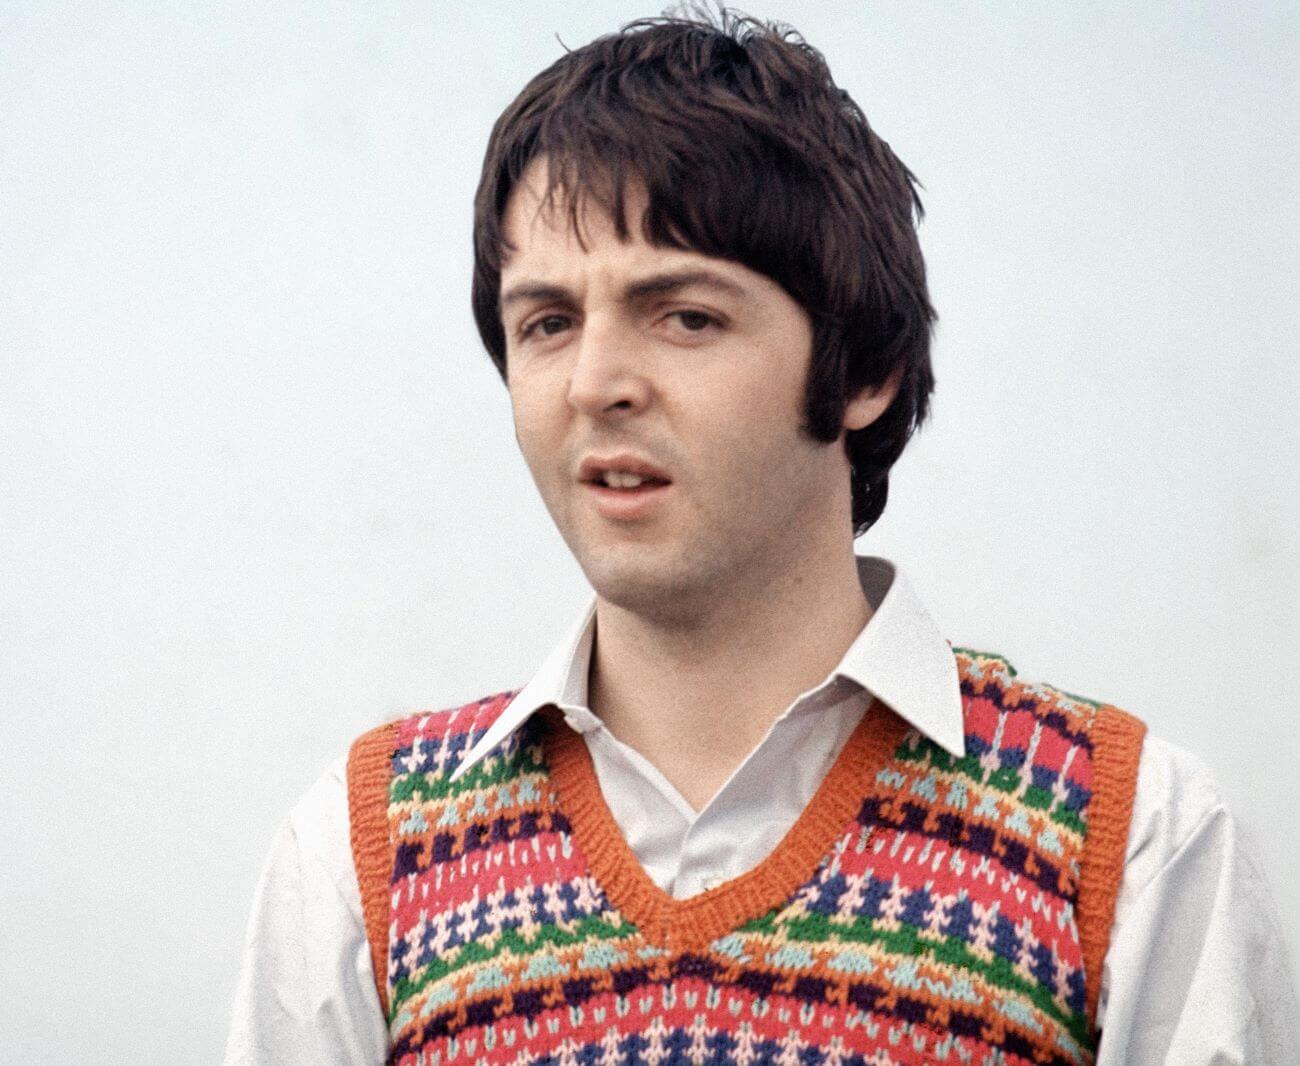 Paul McCartney wears a white collared shirt and a sweater vest.